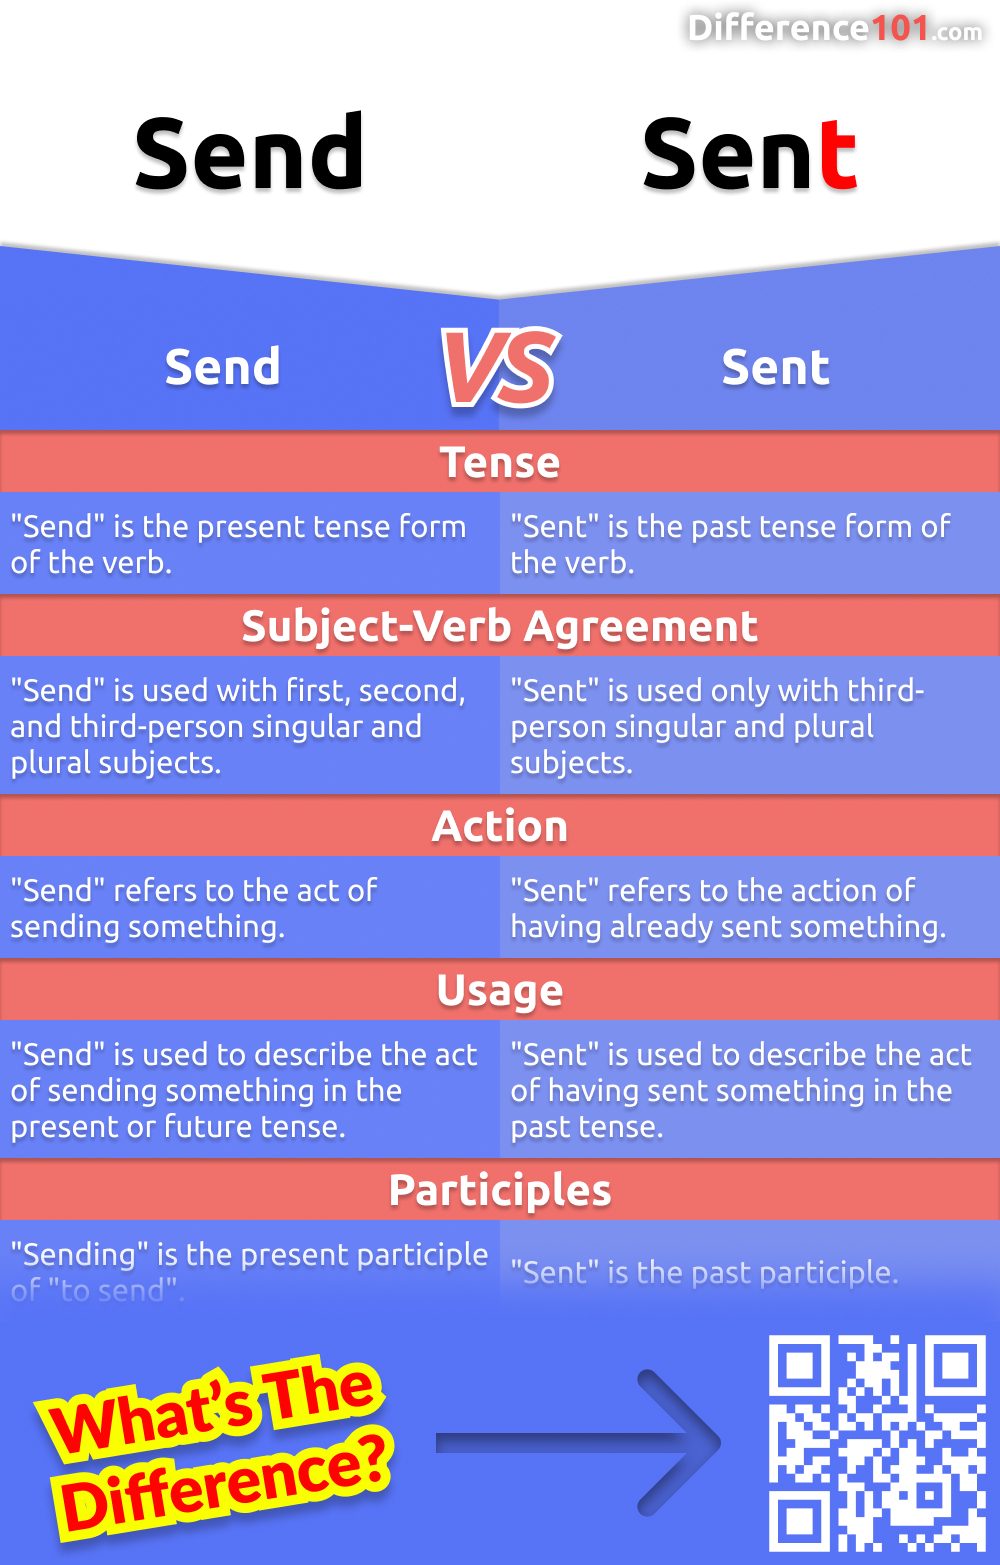 Do you know when to use "send" or "sent"? Both words are verbs, but they have different meanings and uses. Read more to learn about the differences between "send" and "sent" and uses for each word.